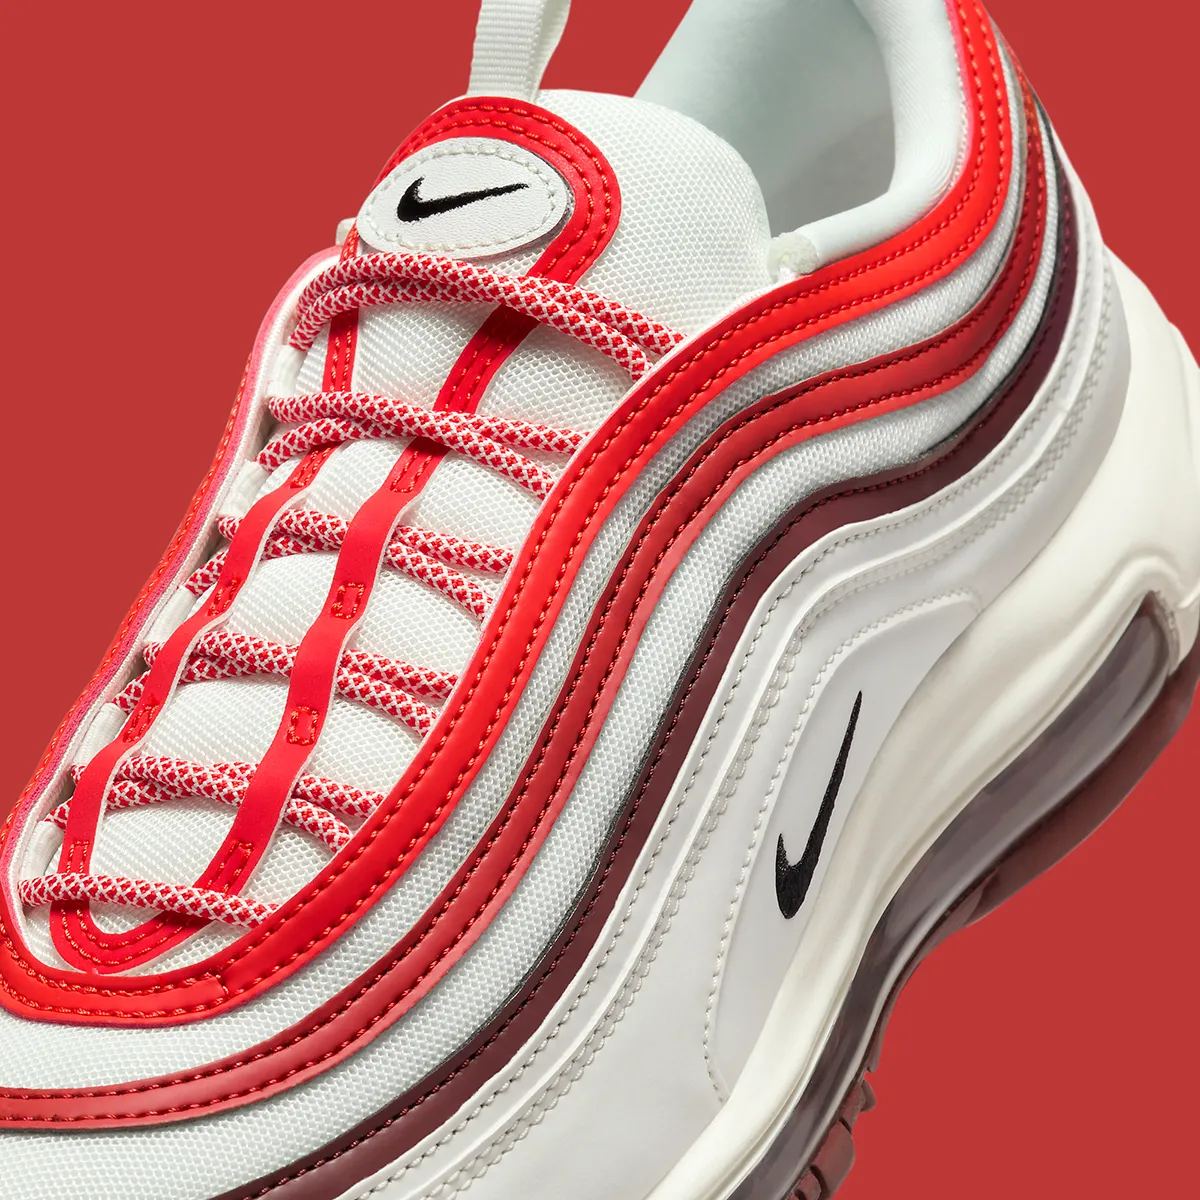 nike-air-max-97-white-dune-red-fn6957-101-6